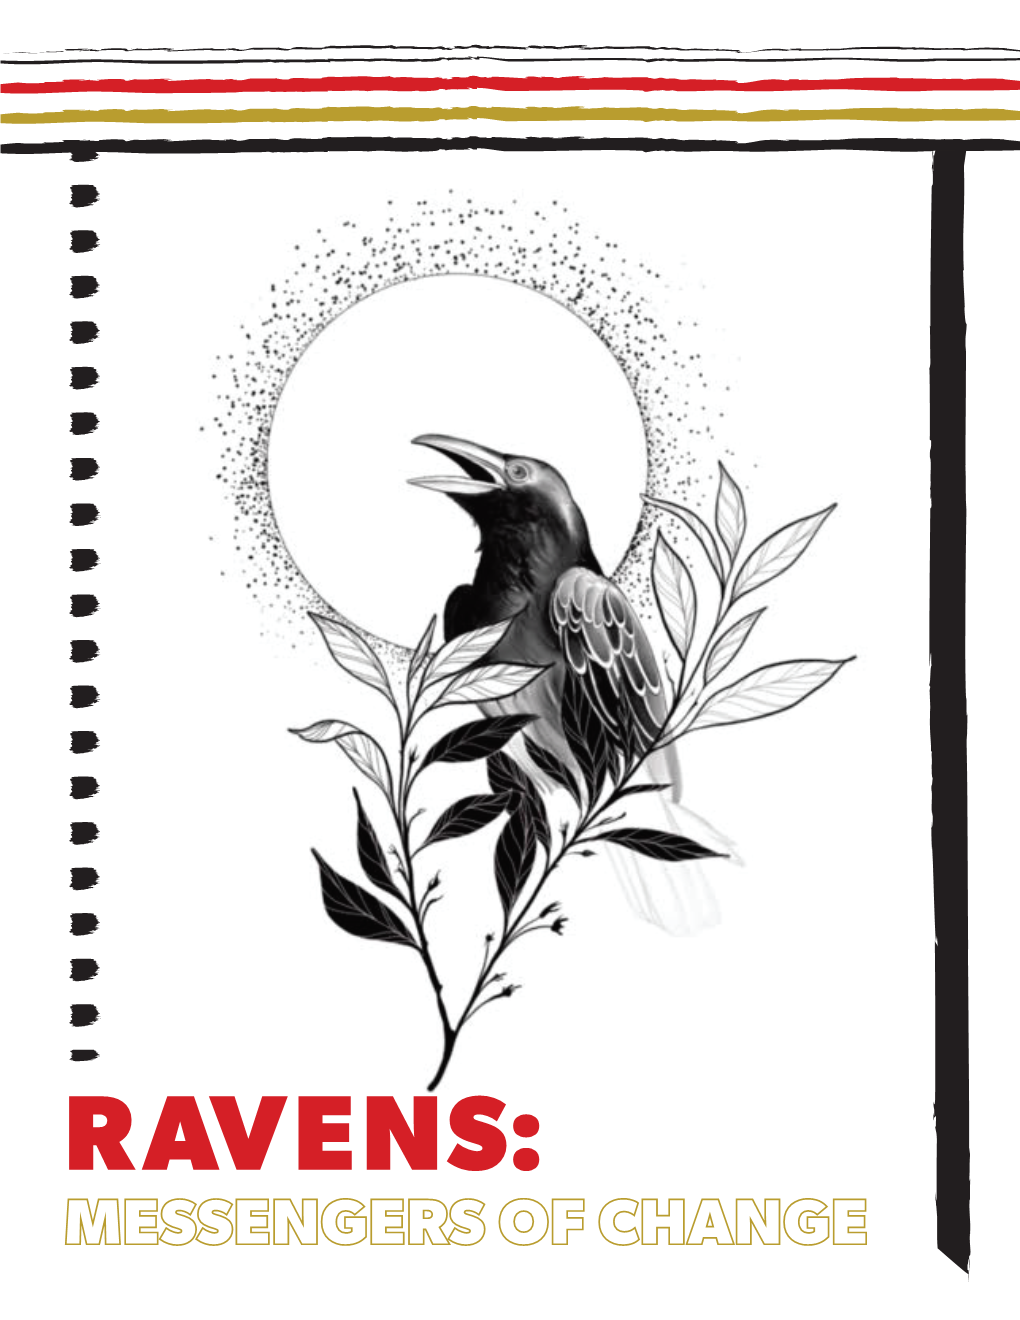 RAVENS: Ravens Are Such Common Birds That When We See Them, We Often Don’T Give Them a Second Thought